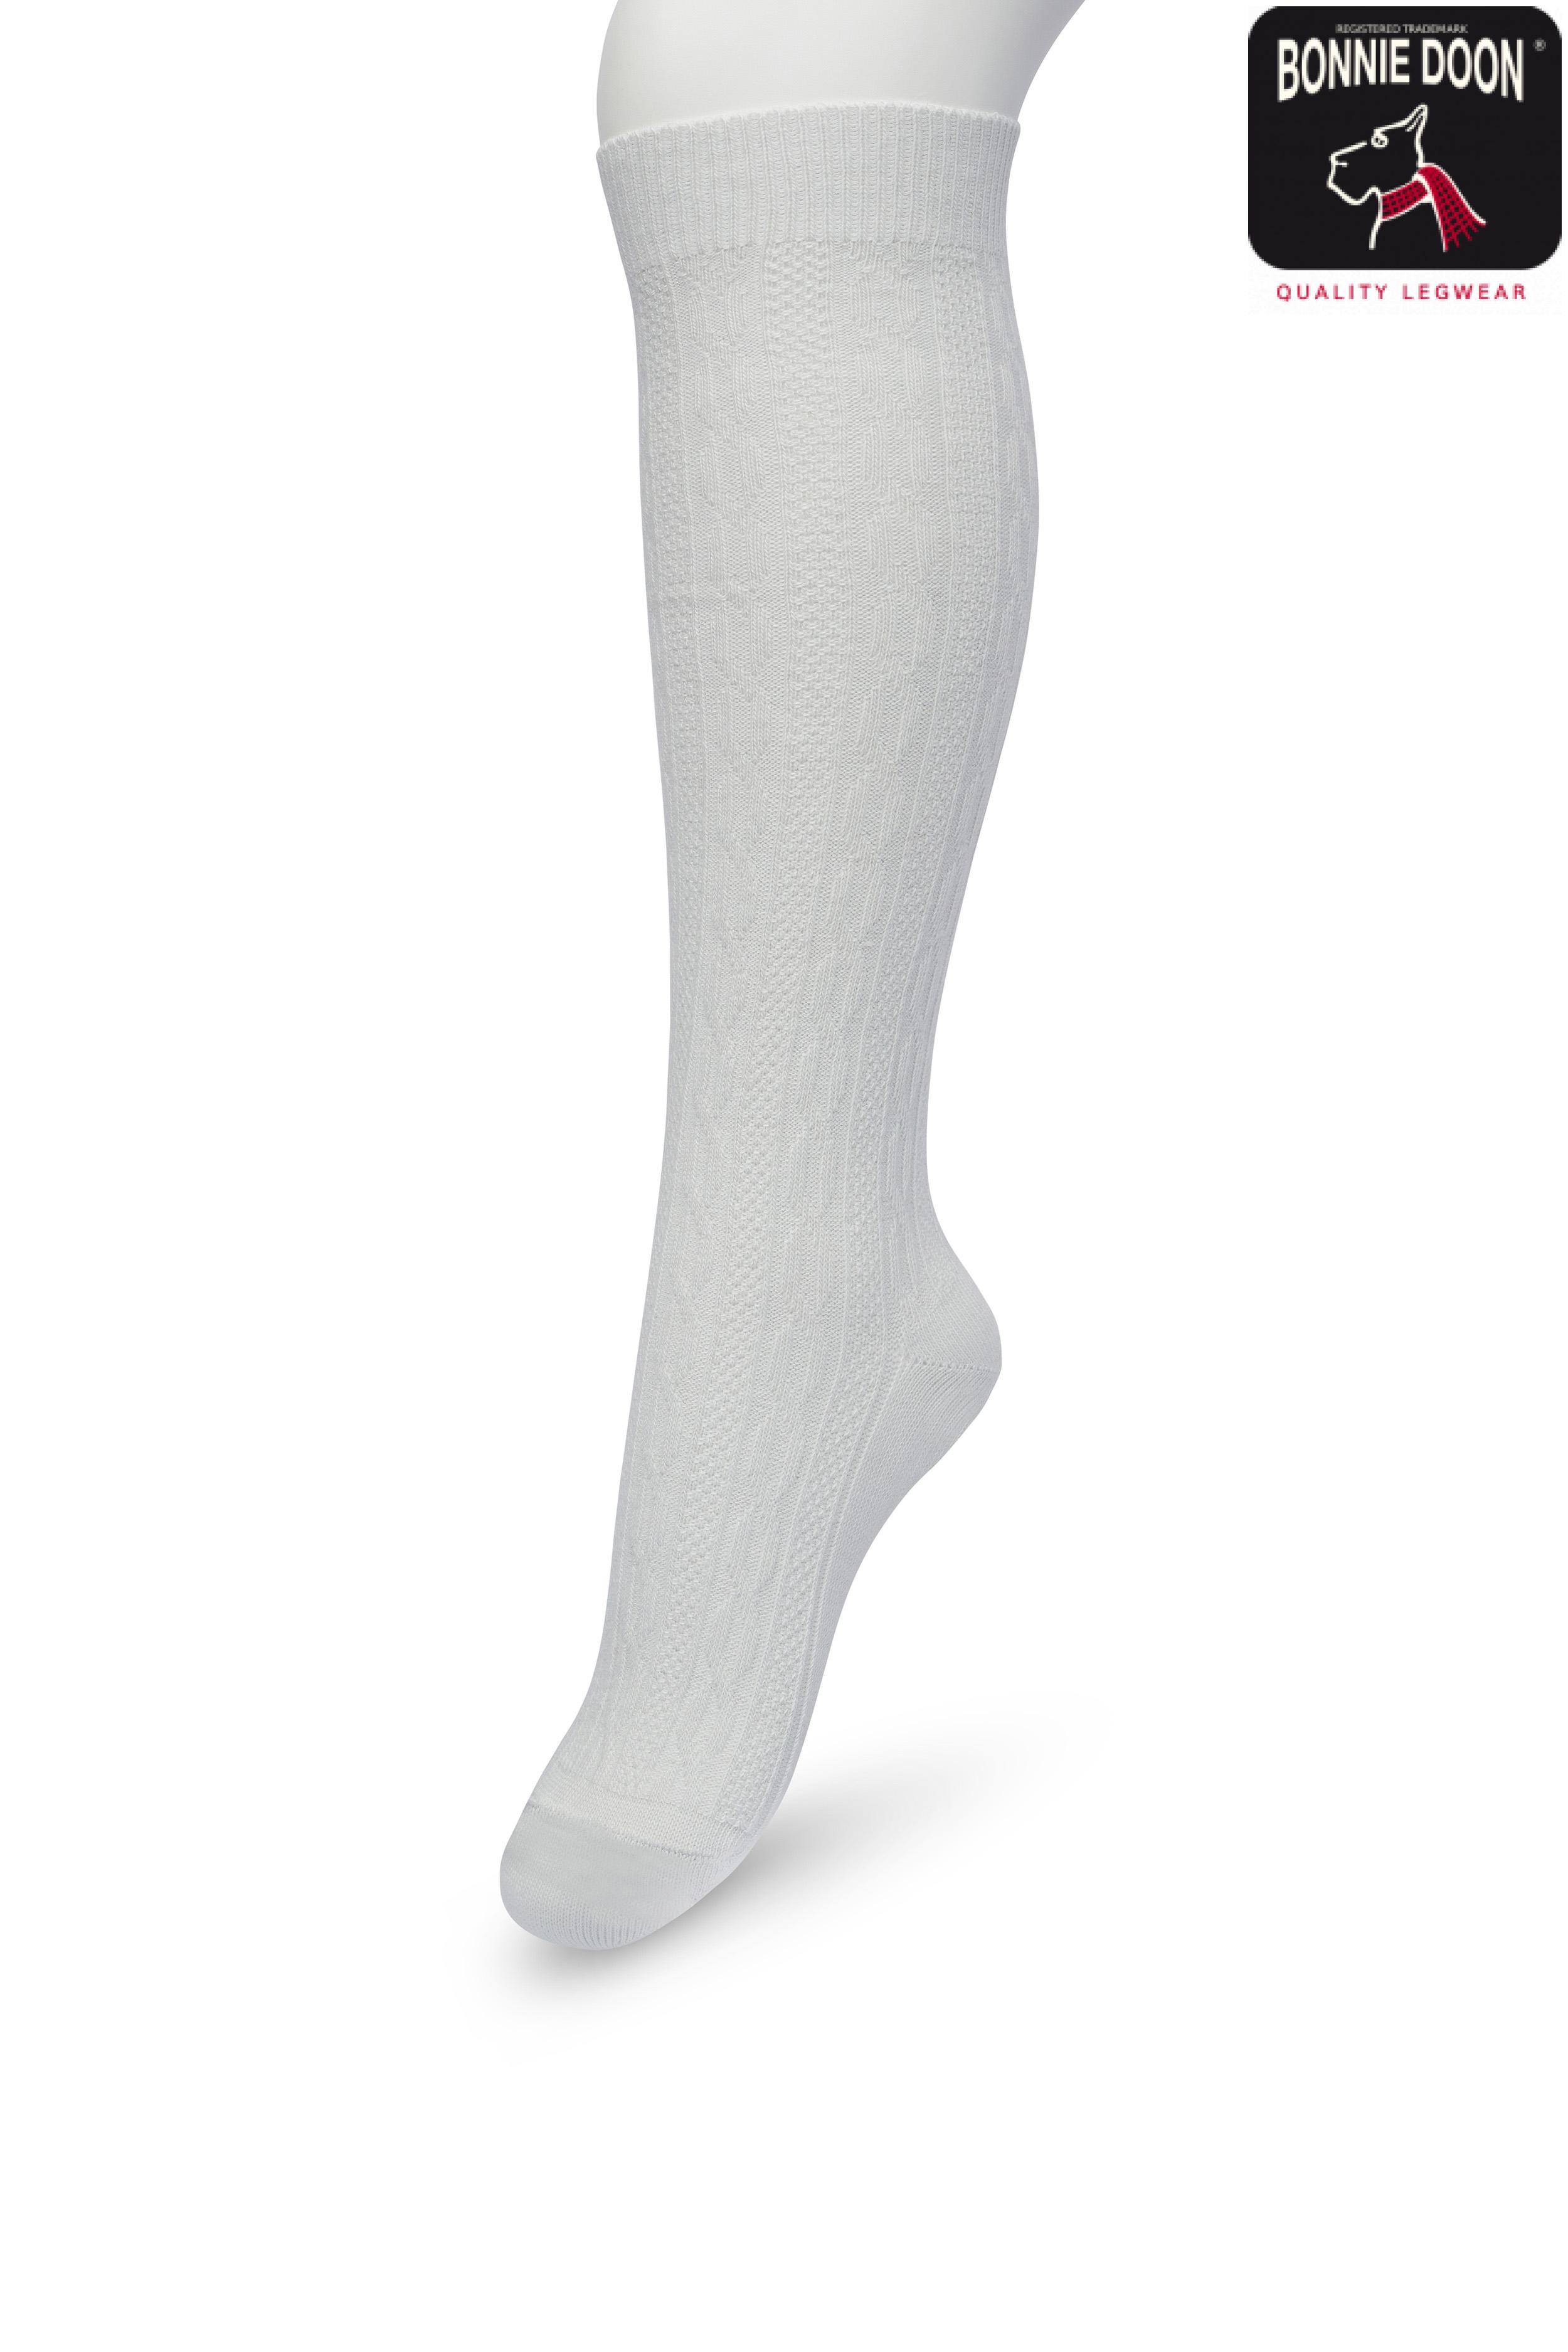 Classic Cable knee high Light grey